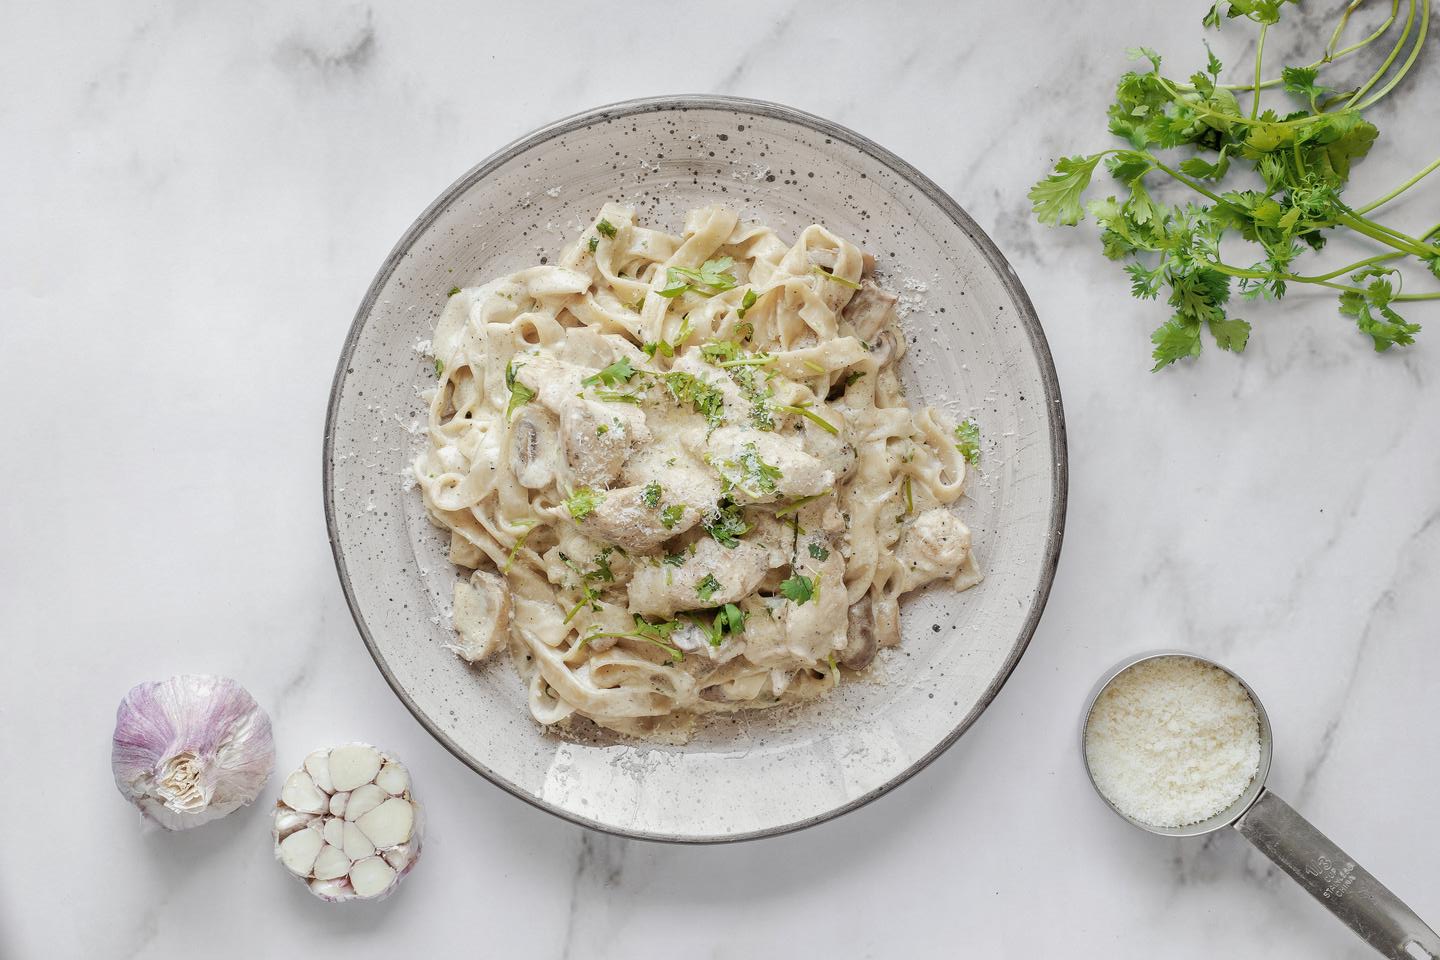 Shop for Ready-To-Eat Meals 🍱 at the Grocery Store and We Will Determine Your Age Group Fettuccine alfredo pasta